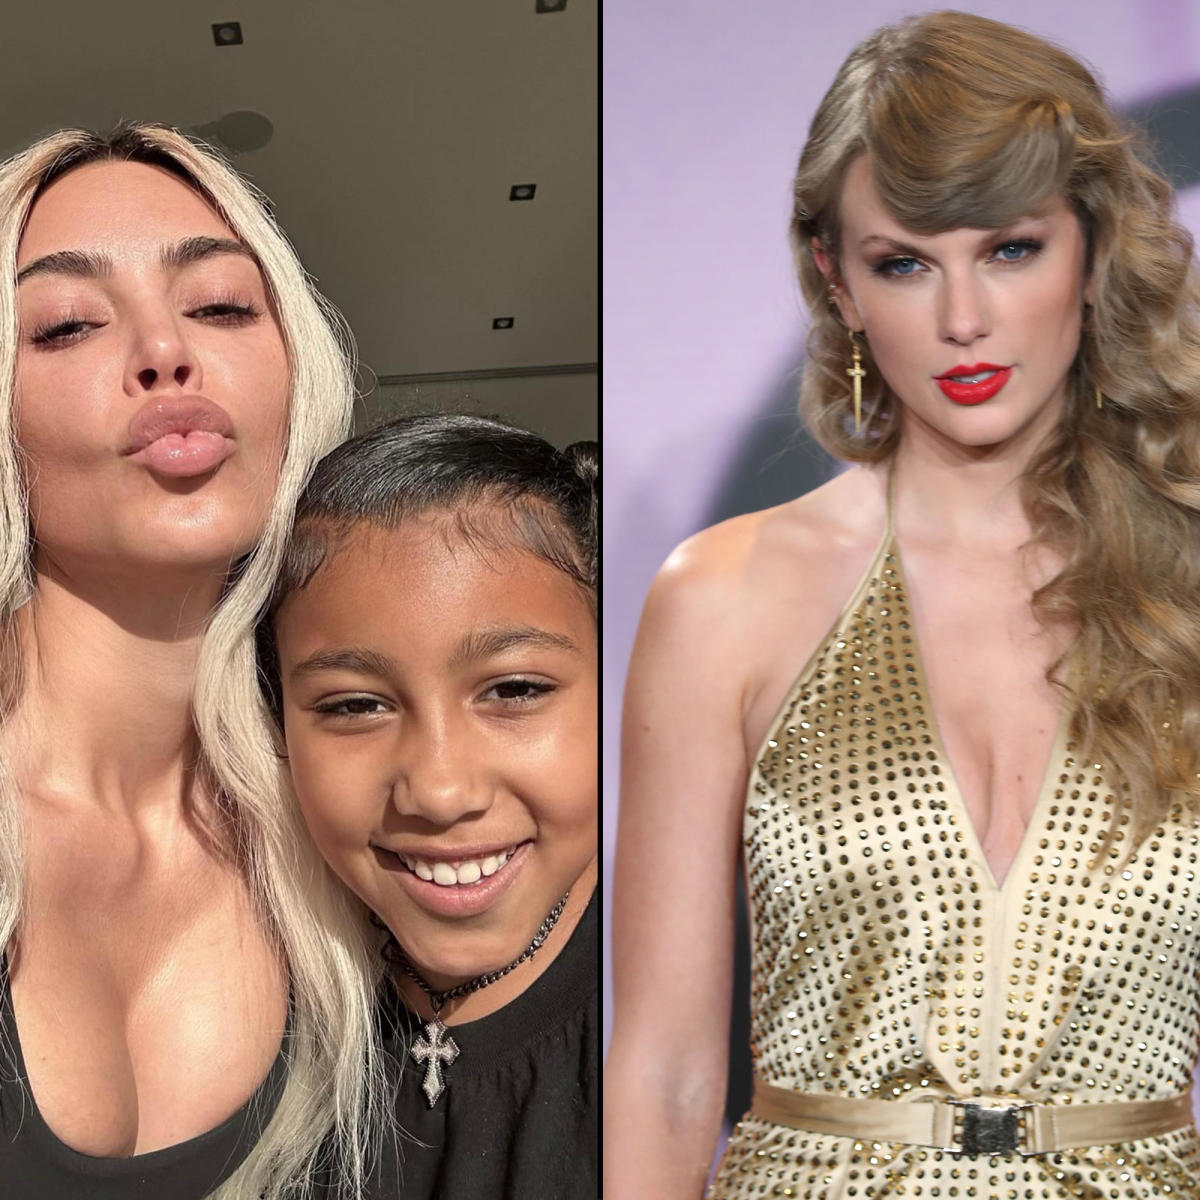 The drama from Kim Kardashian is back again, and this time, watch as her daughter North West humiliates Taylor Swift on TikTok, causing a stir among fans. "What does Kim teach her child?"